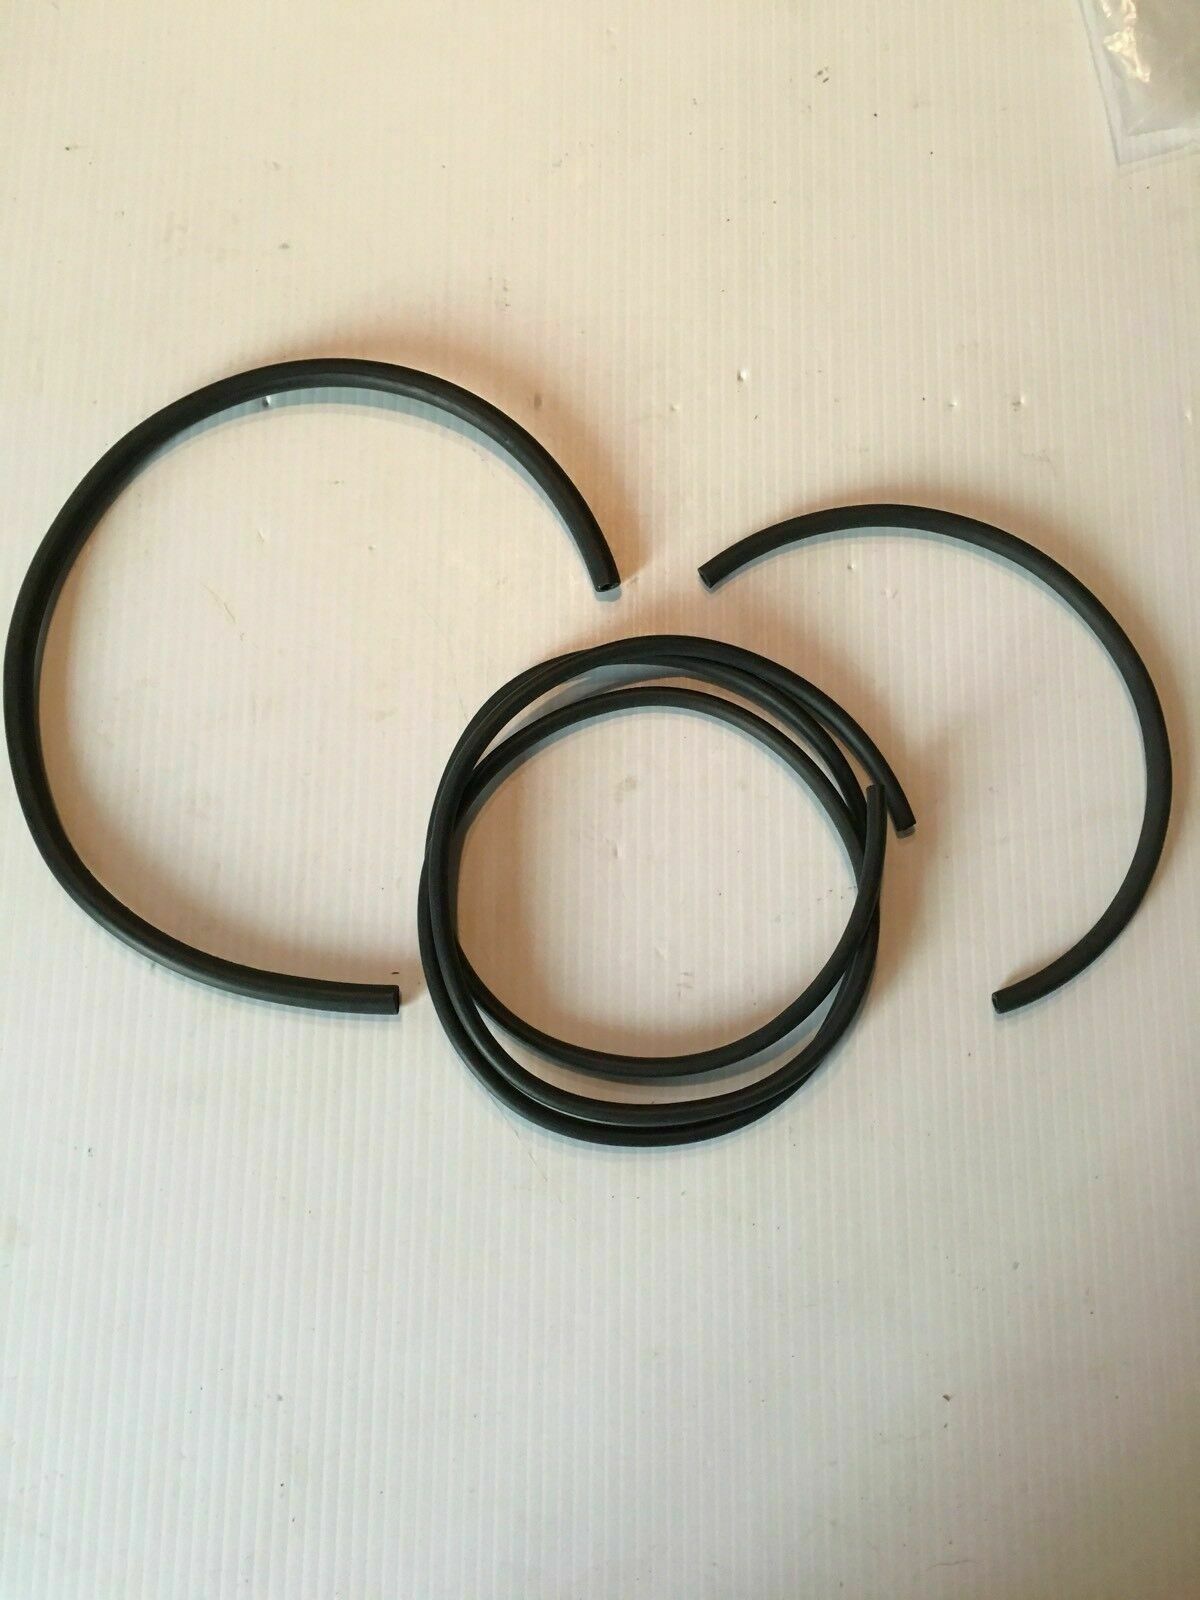 Windshield Washer Parts: NEW 1955 - 1959 Chevy GMC Truck Windshield Washer Hose Kit With Foot Pump